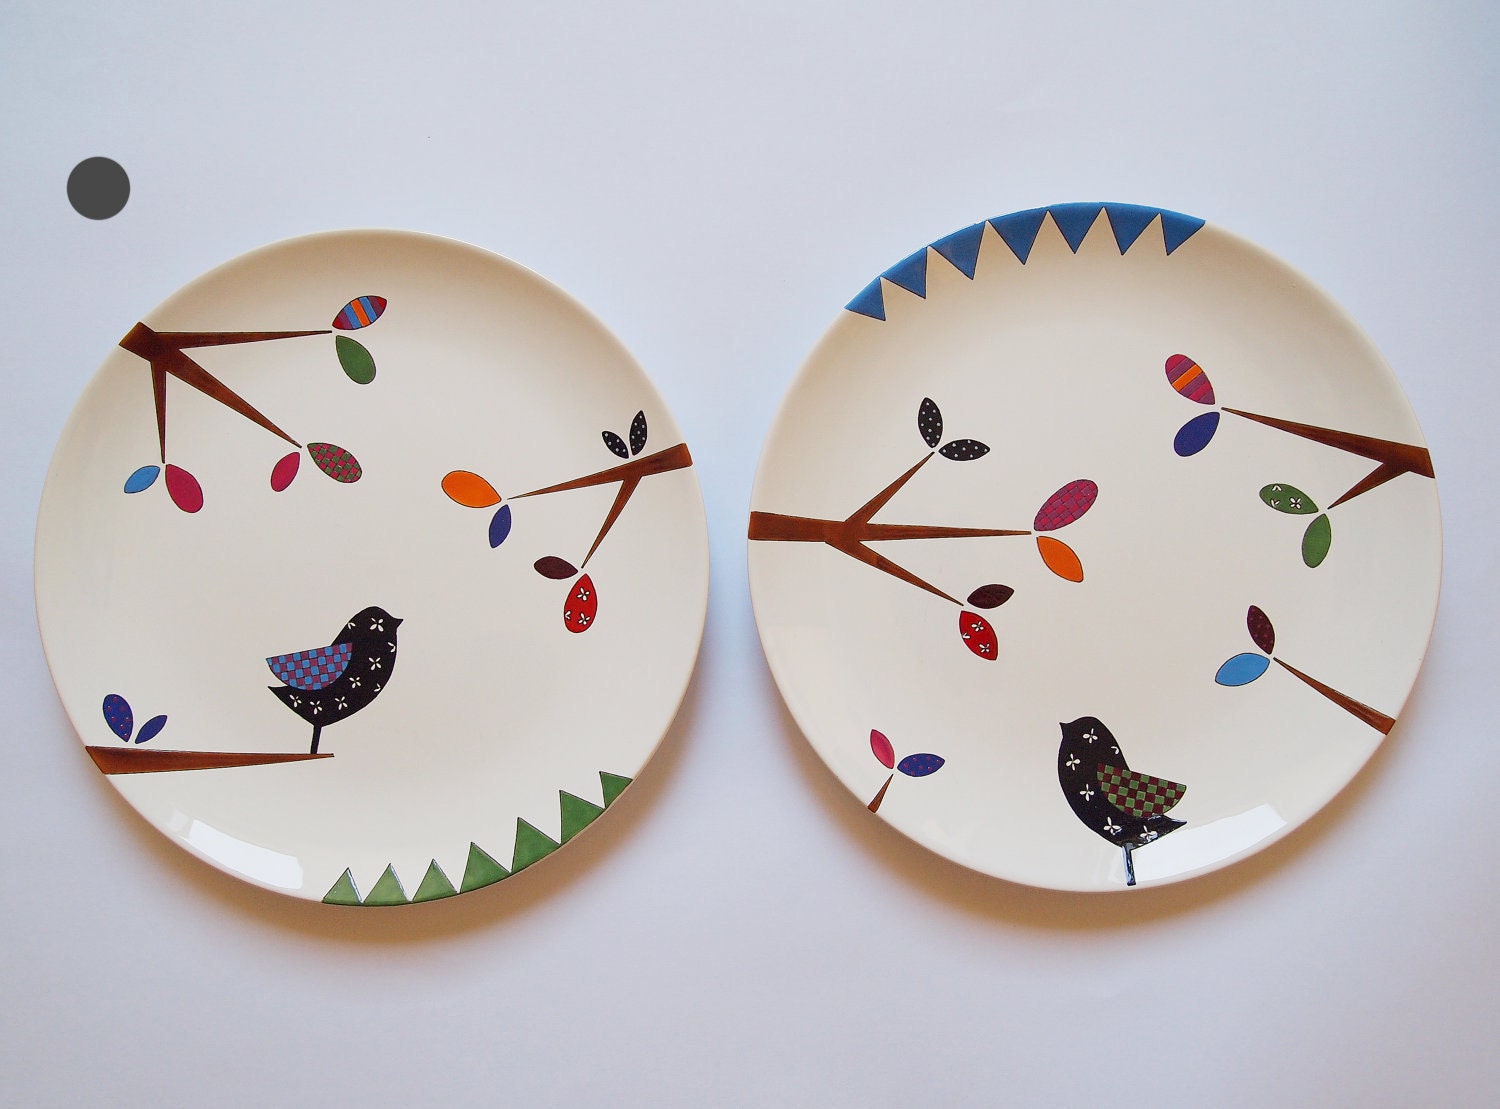 Bird series - Composition of two wall hanging plates